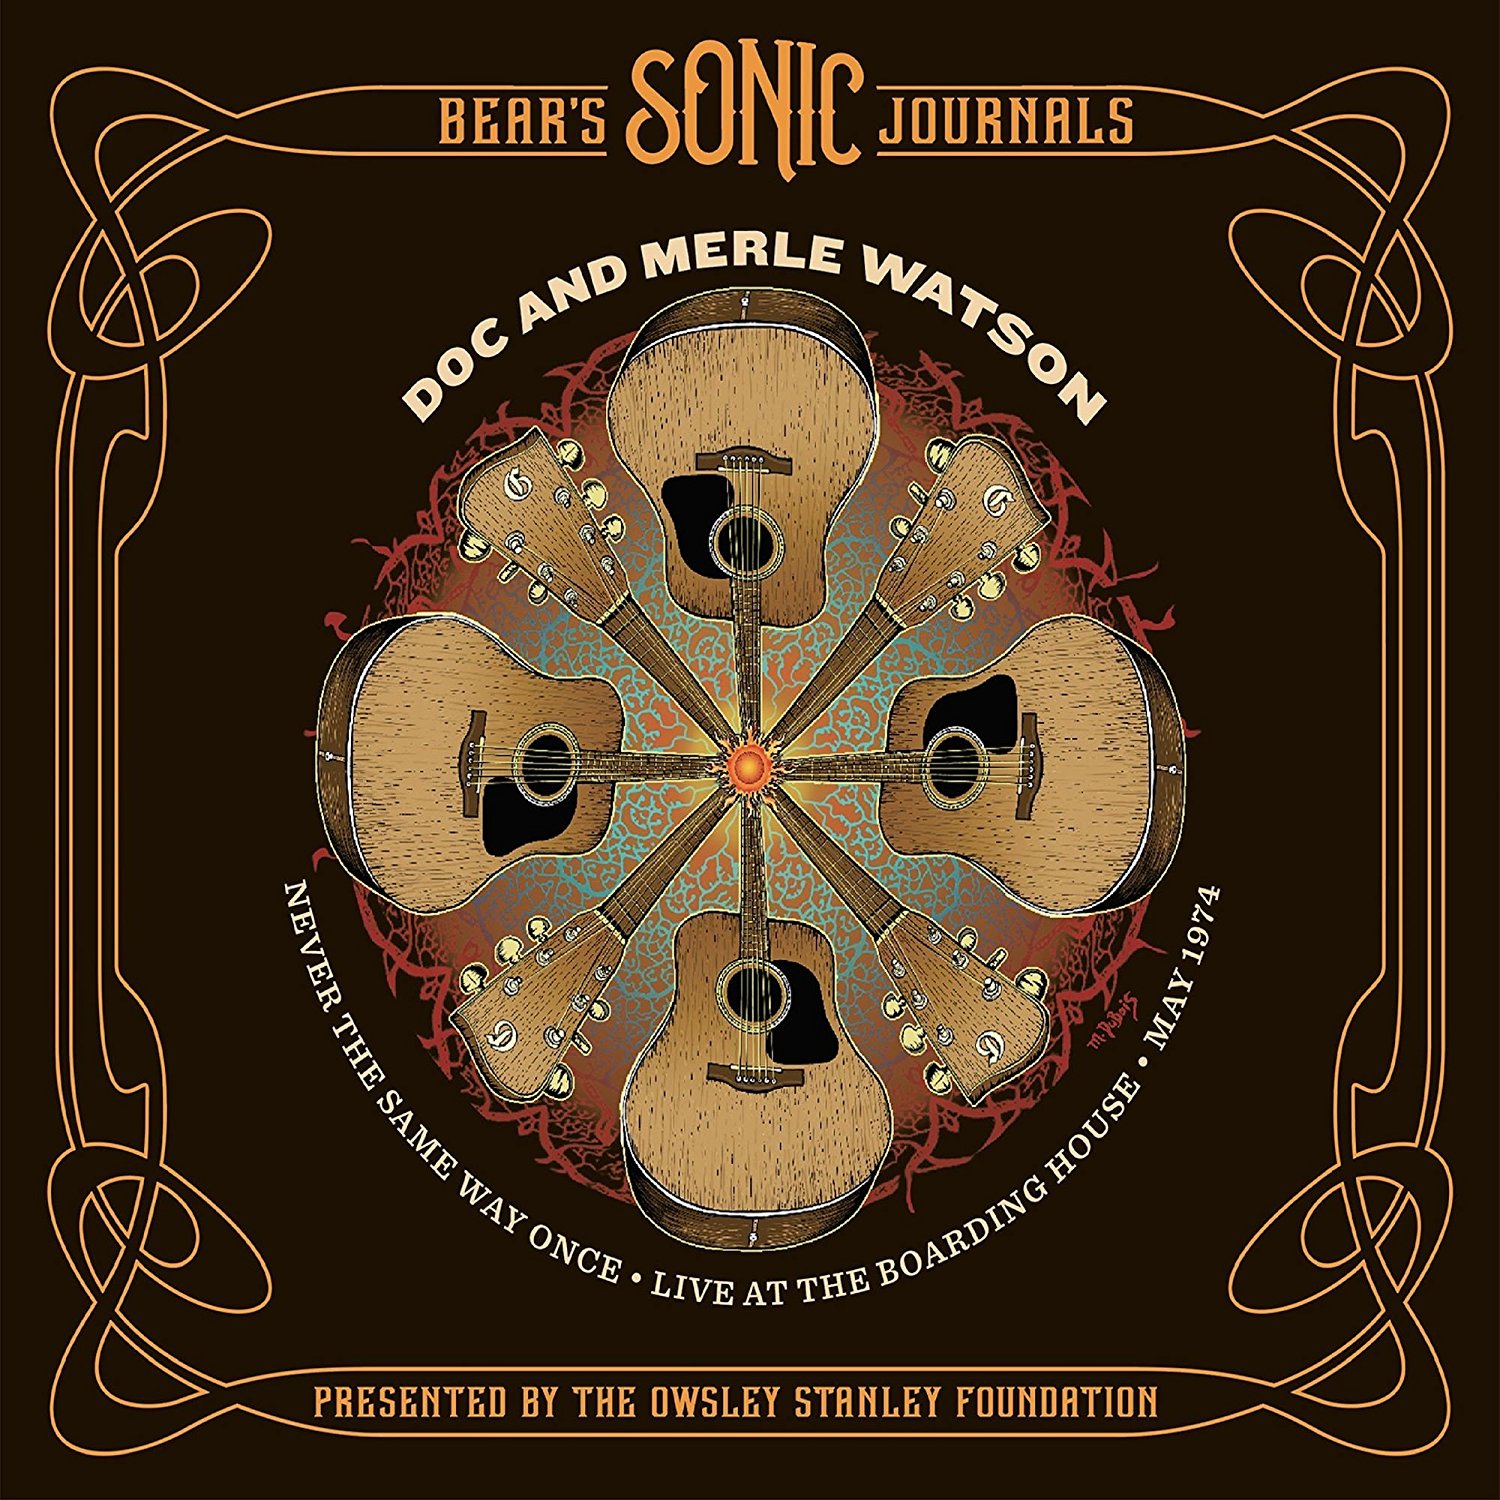 Doc and Merle Watson – Bear’s Sonic Journals: Never The Same Way Once (2017) [Qobuz FLAC 24bit/44,1kHz]